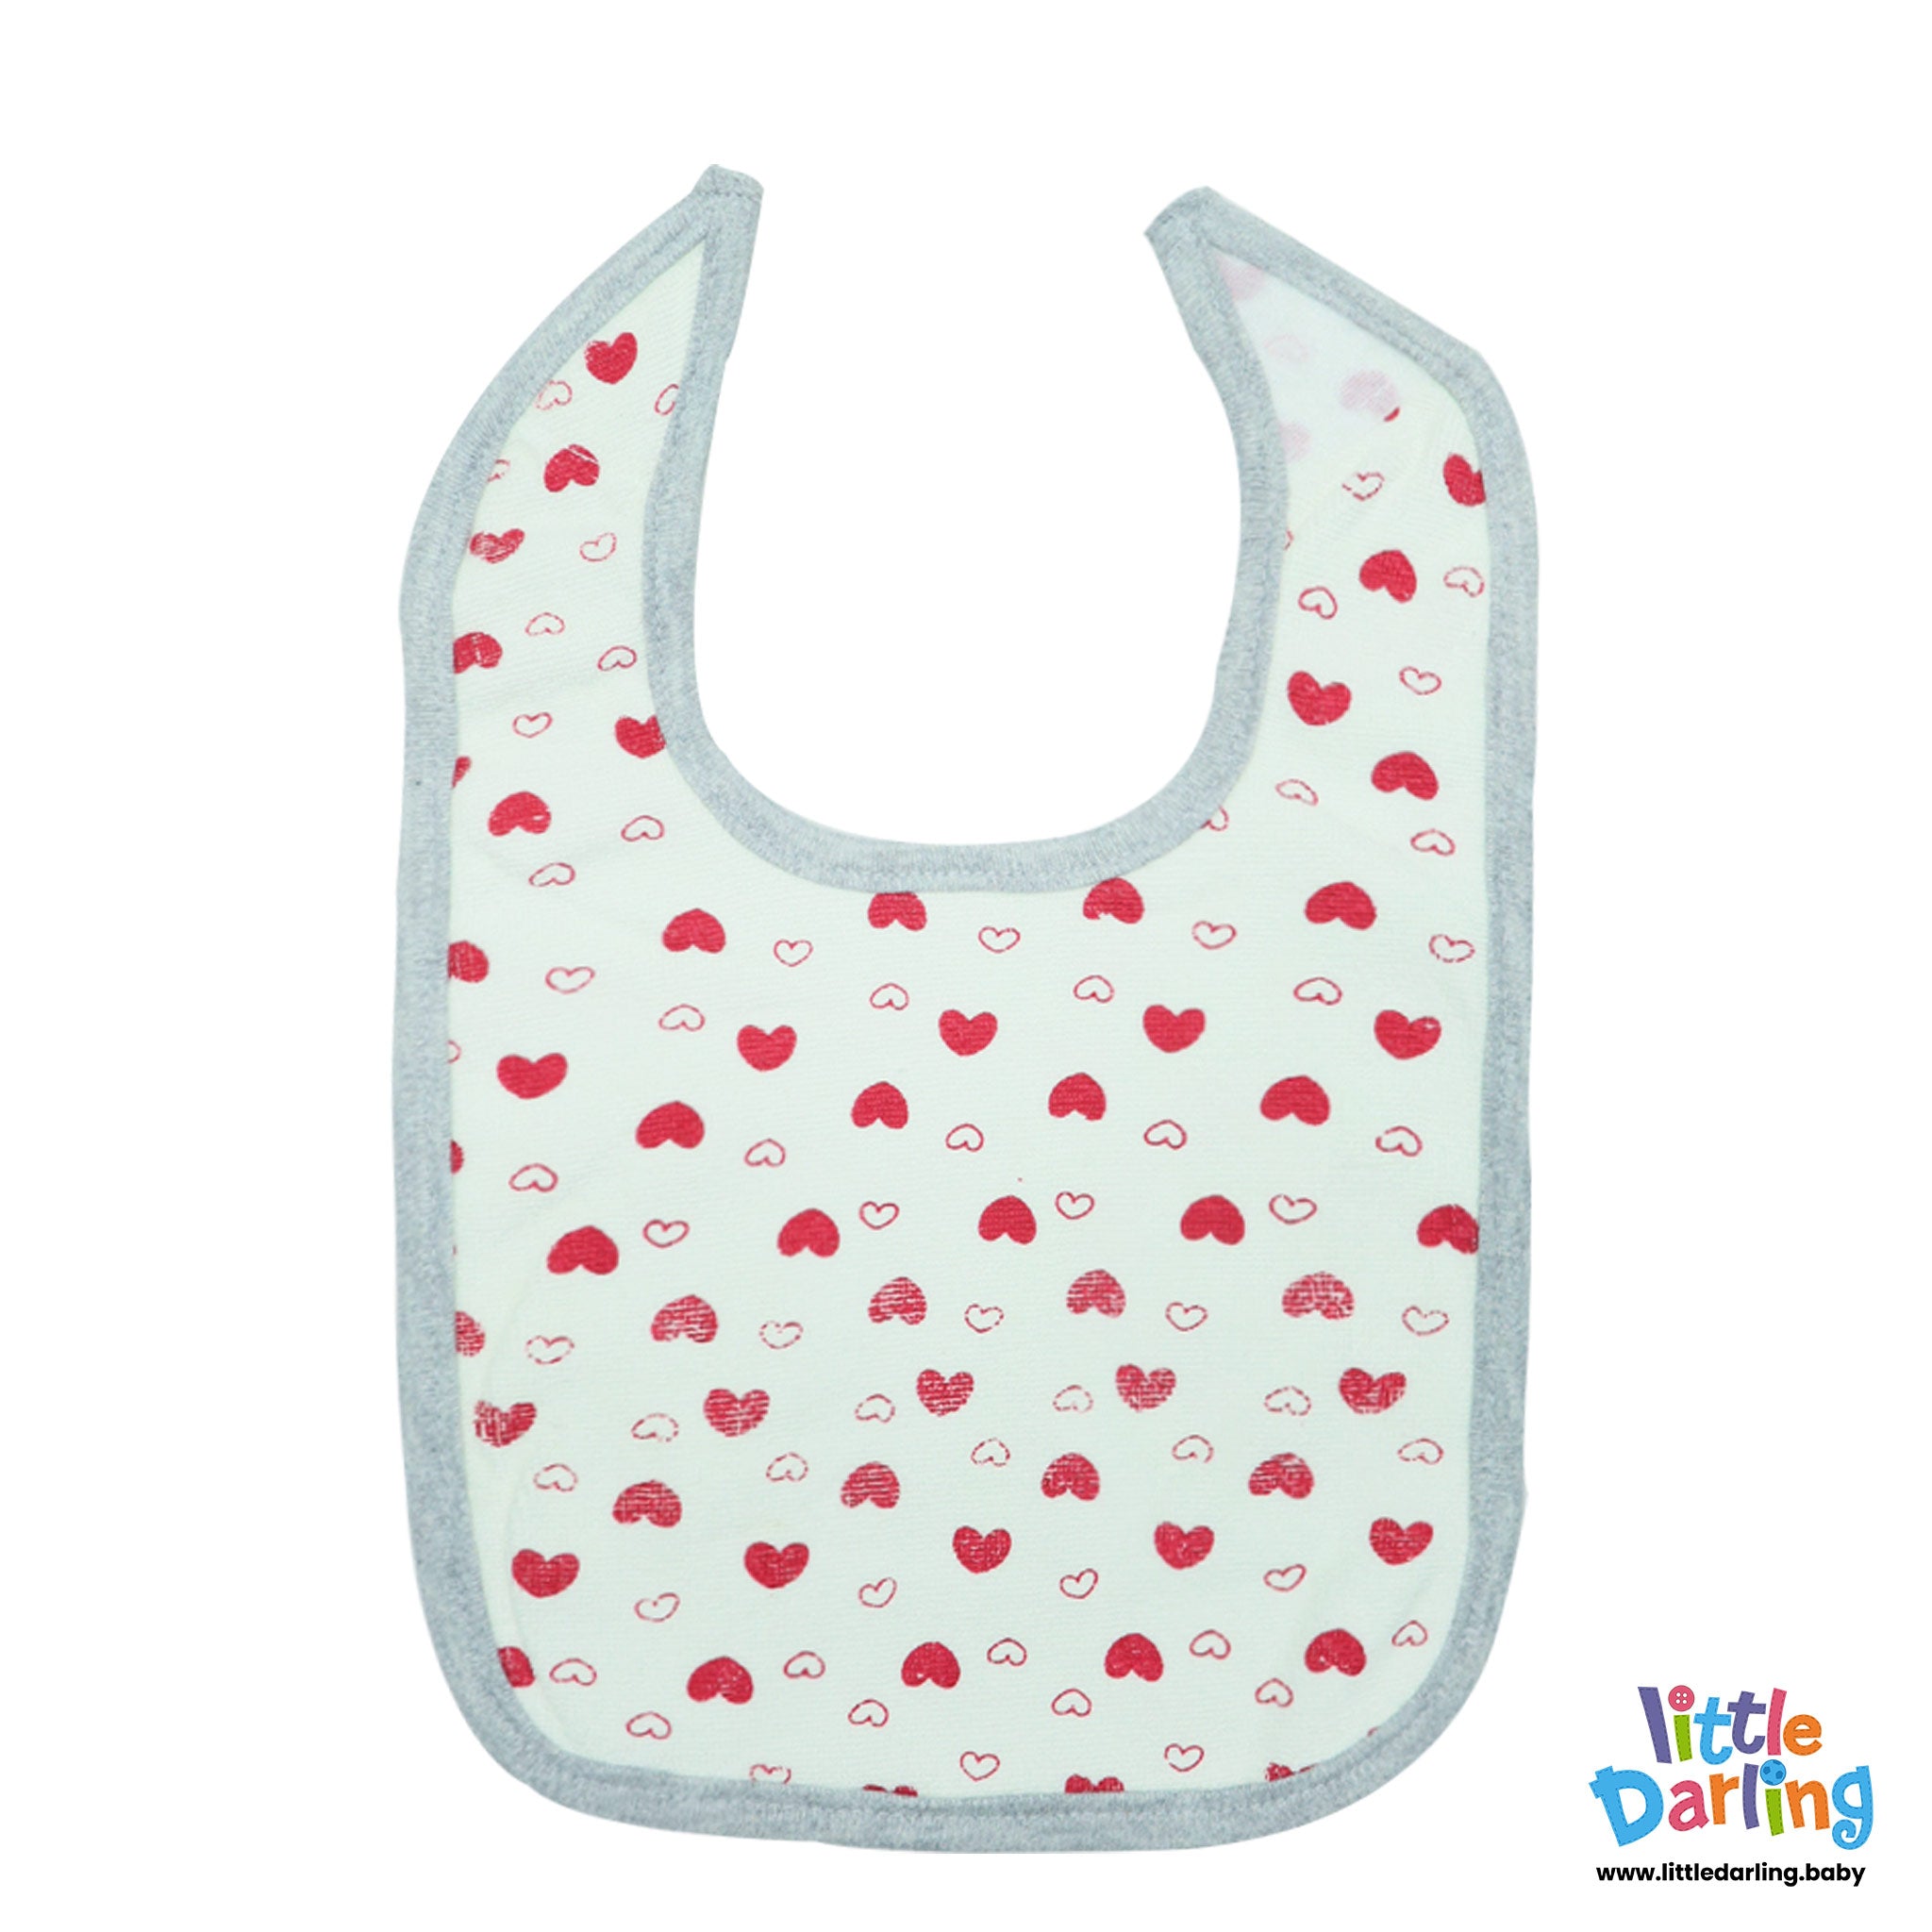 Baby Bibs Heart Print Pack of 3 by Little Darling